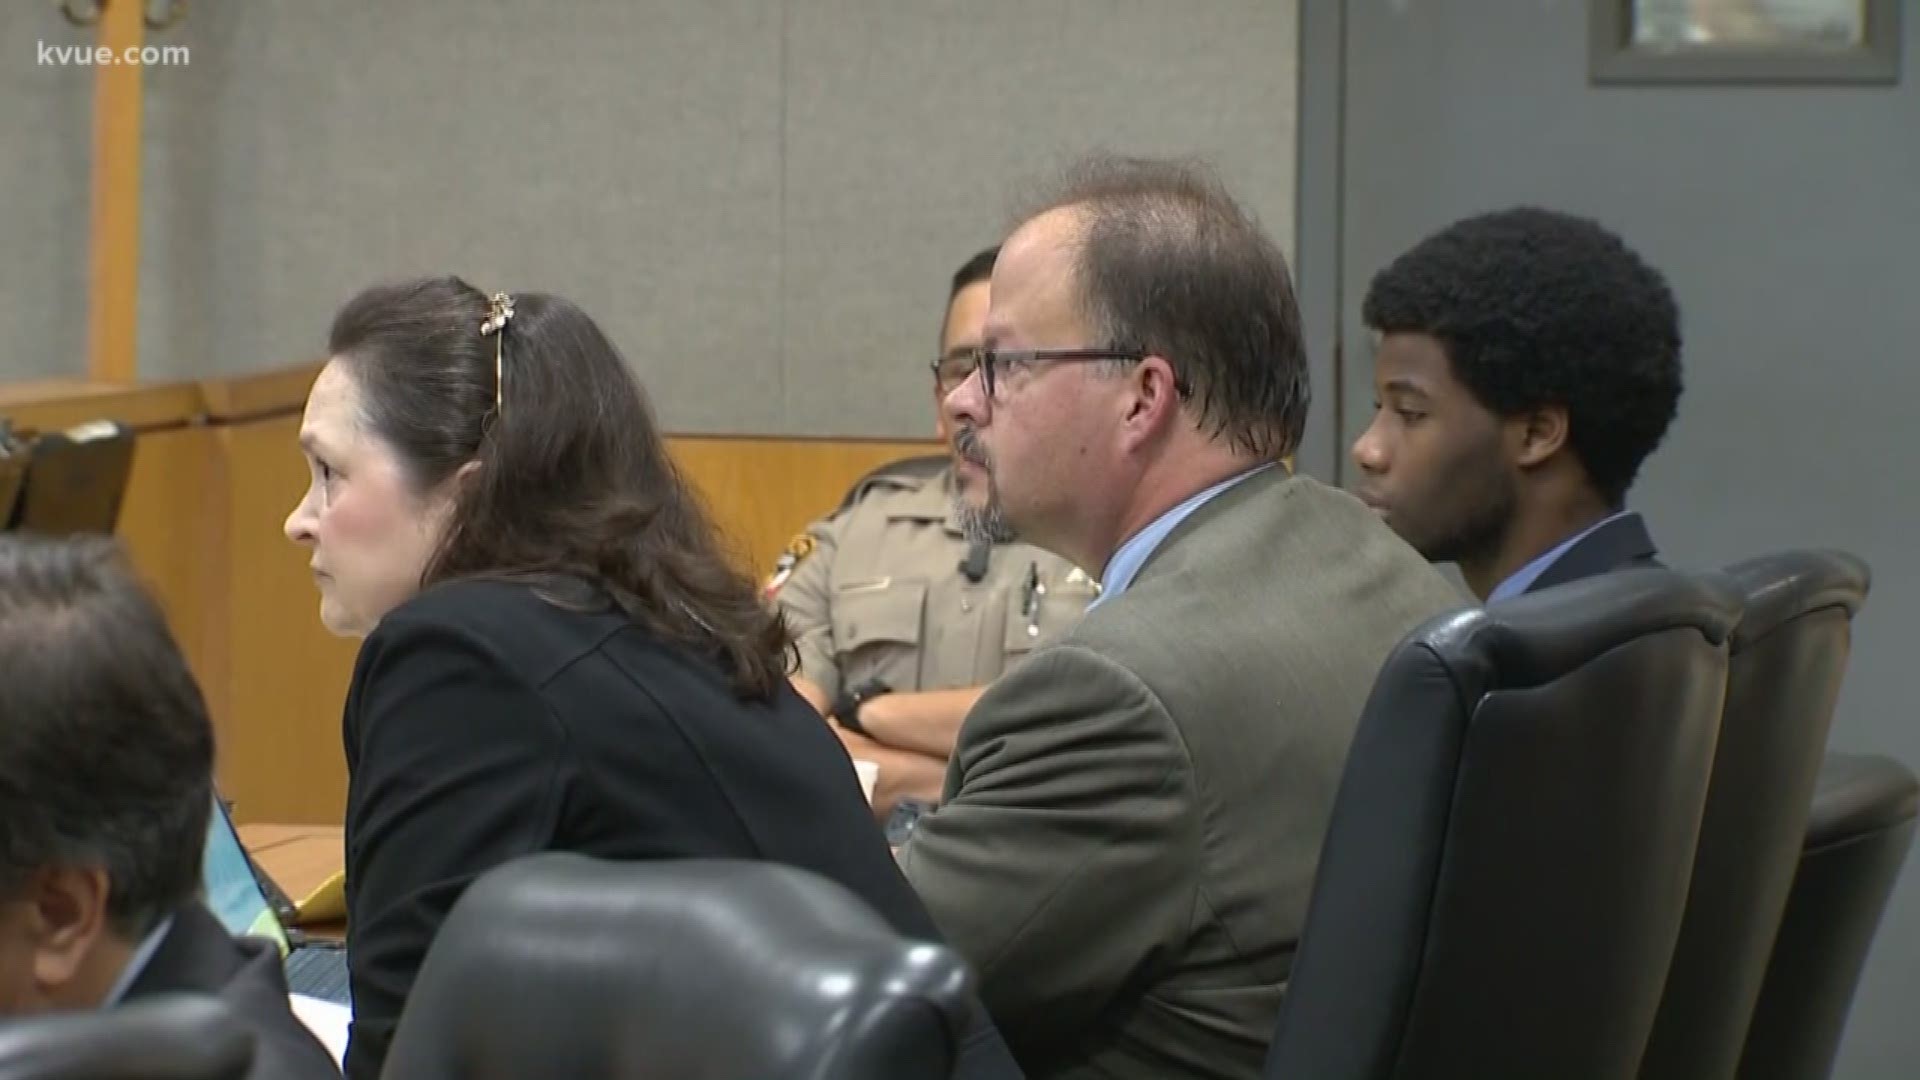 Prosecutors begged 12 people to remember a murdered UT student in their closing arguments today. Right now, jurors are deciding if the man accused of killing her, Meechaiel Criner, played a role in Haruka Weiser's death in 2016.